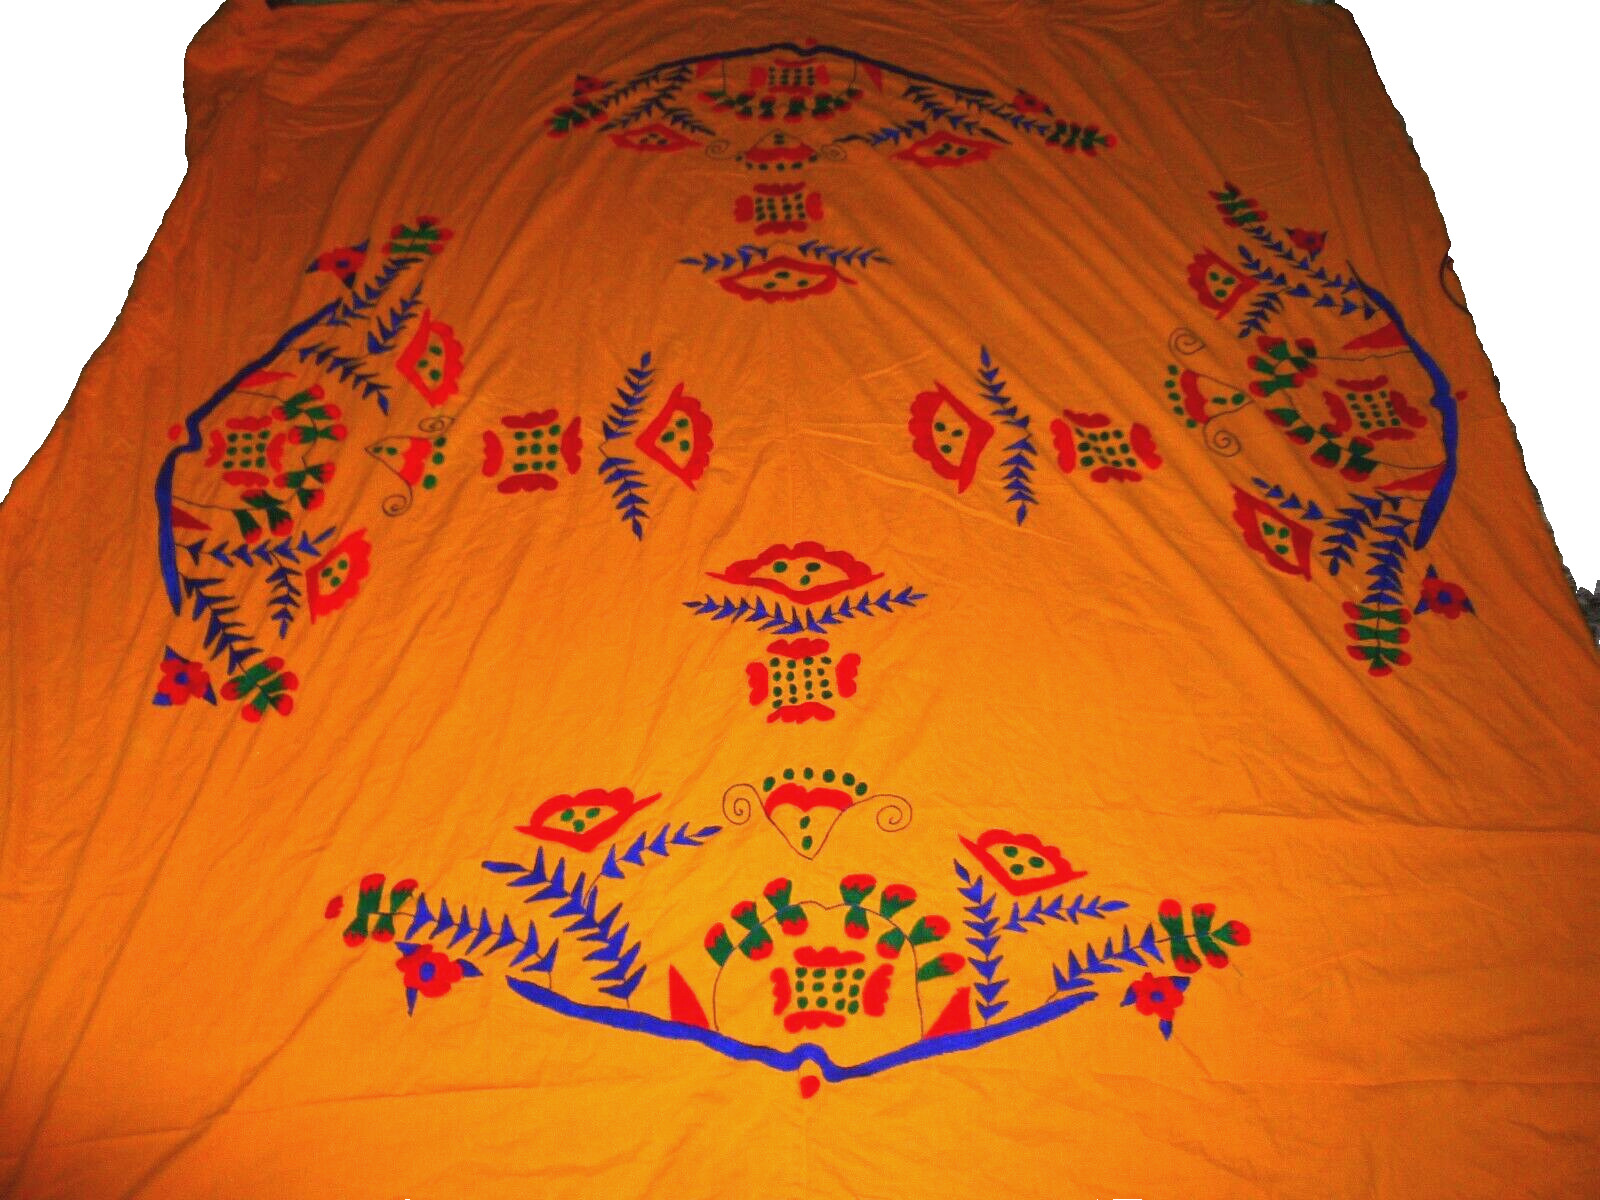 Vintage Mexican Tbalecloth Bedspread Hand Embroidery Yellow Cotton Cloth 82x82\